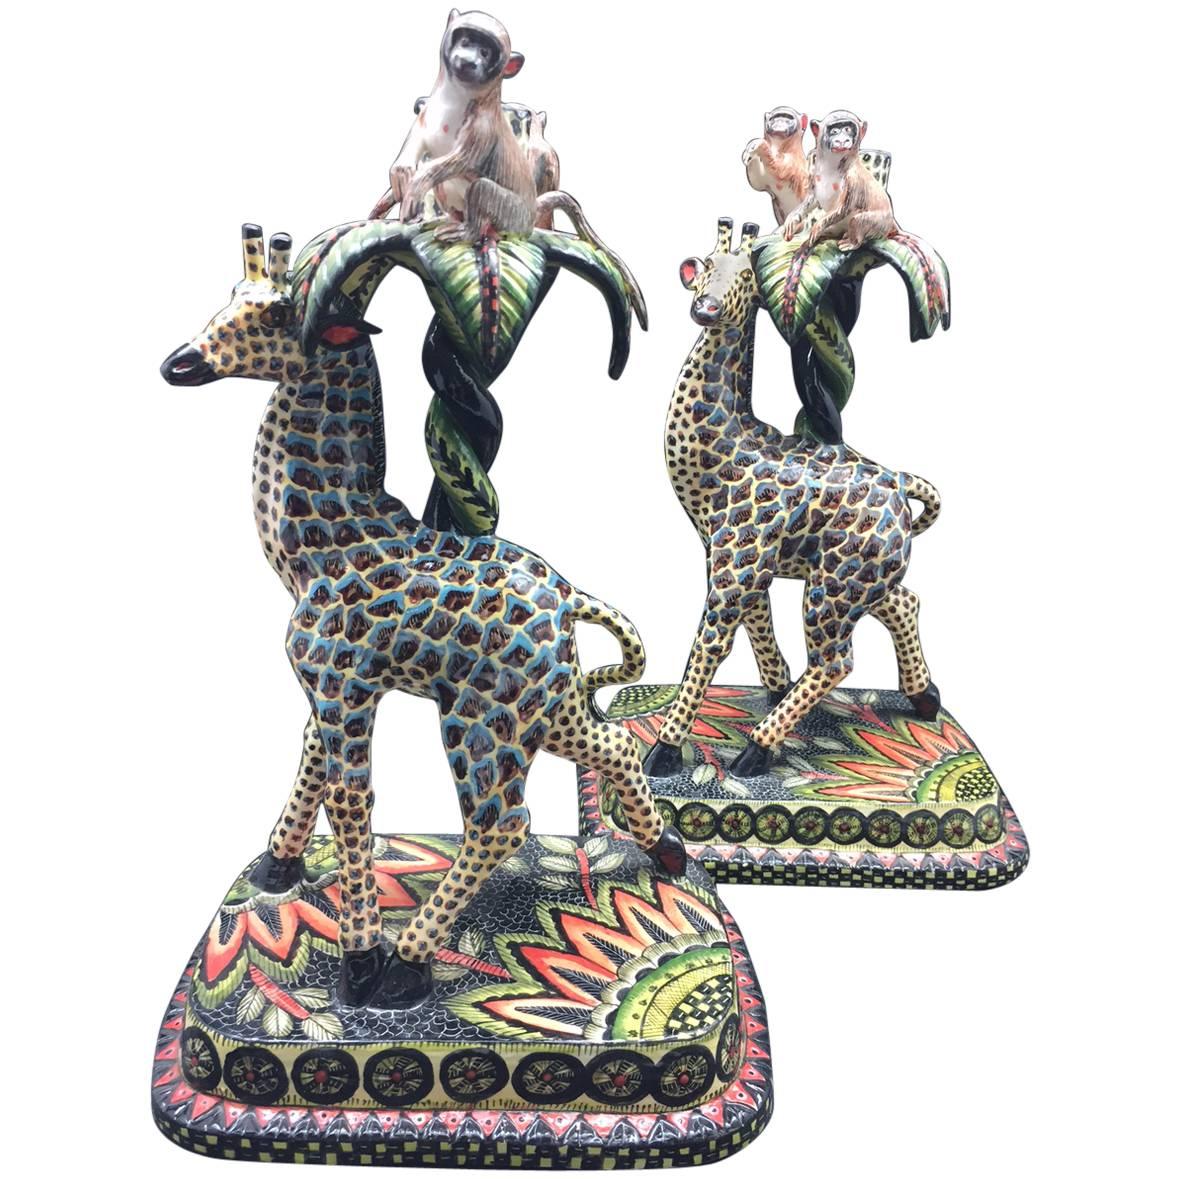 Giraffe and Monkey Candlestick Holders, a Pair, Ceramic by Ardmore from Sout